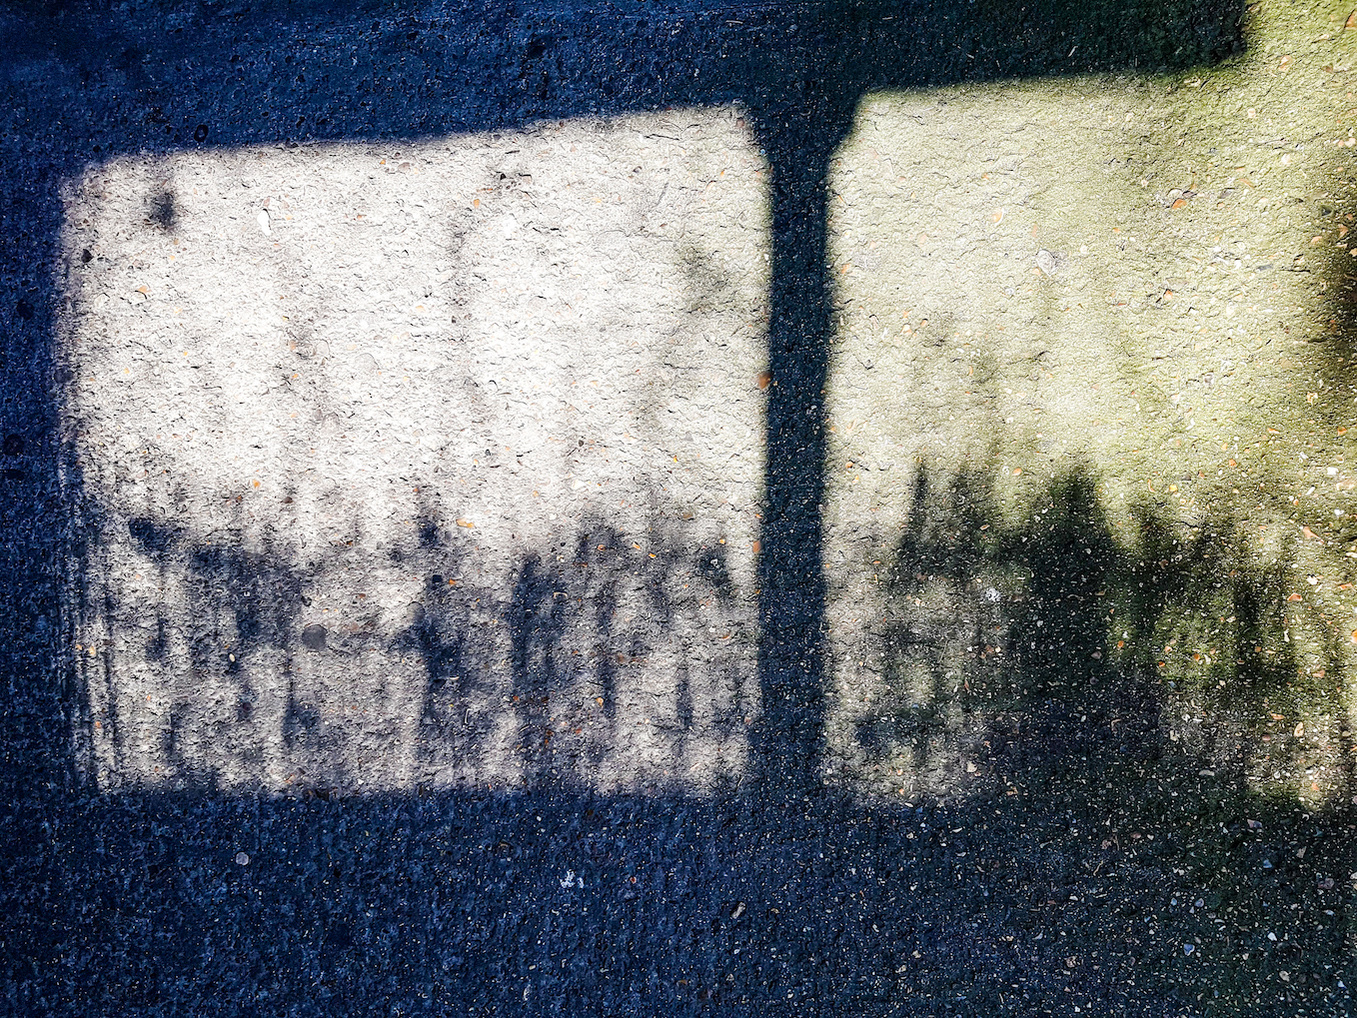 A shadow on the ground - unclear from the photo, but it is the entrance to our flat, with the shadow of a neighbour's fence running along the bottom half of the image.